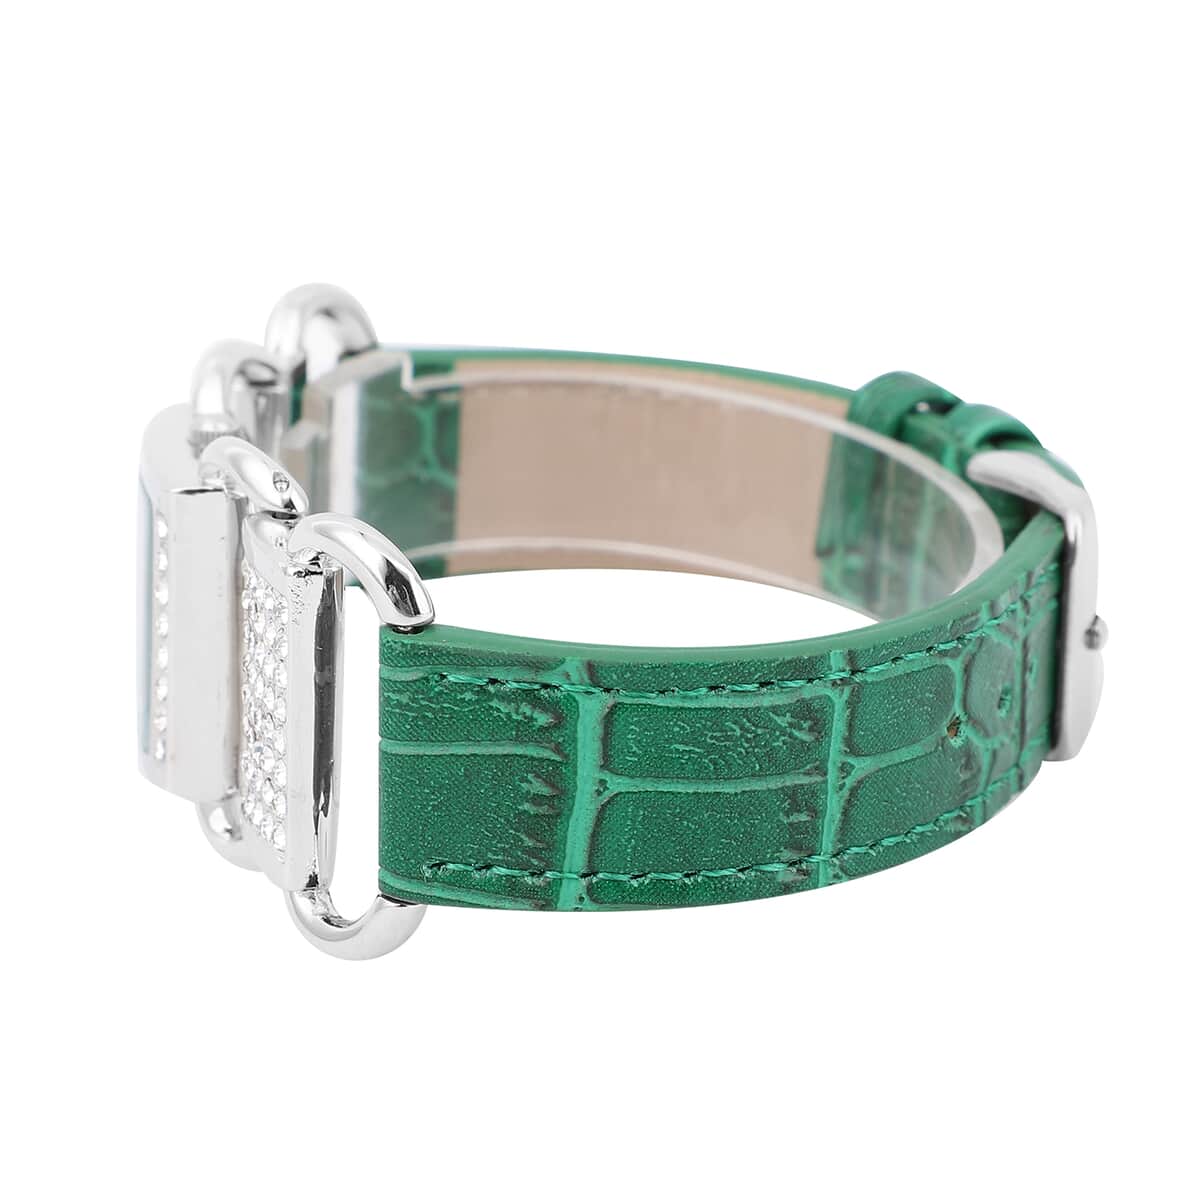 Strada Austrian Crystal Japanese Movement Watch with Green Faux Leather Band image number 4